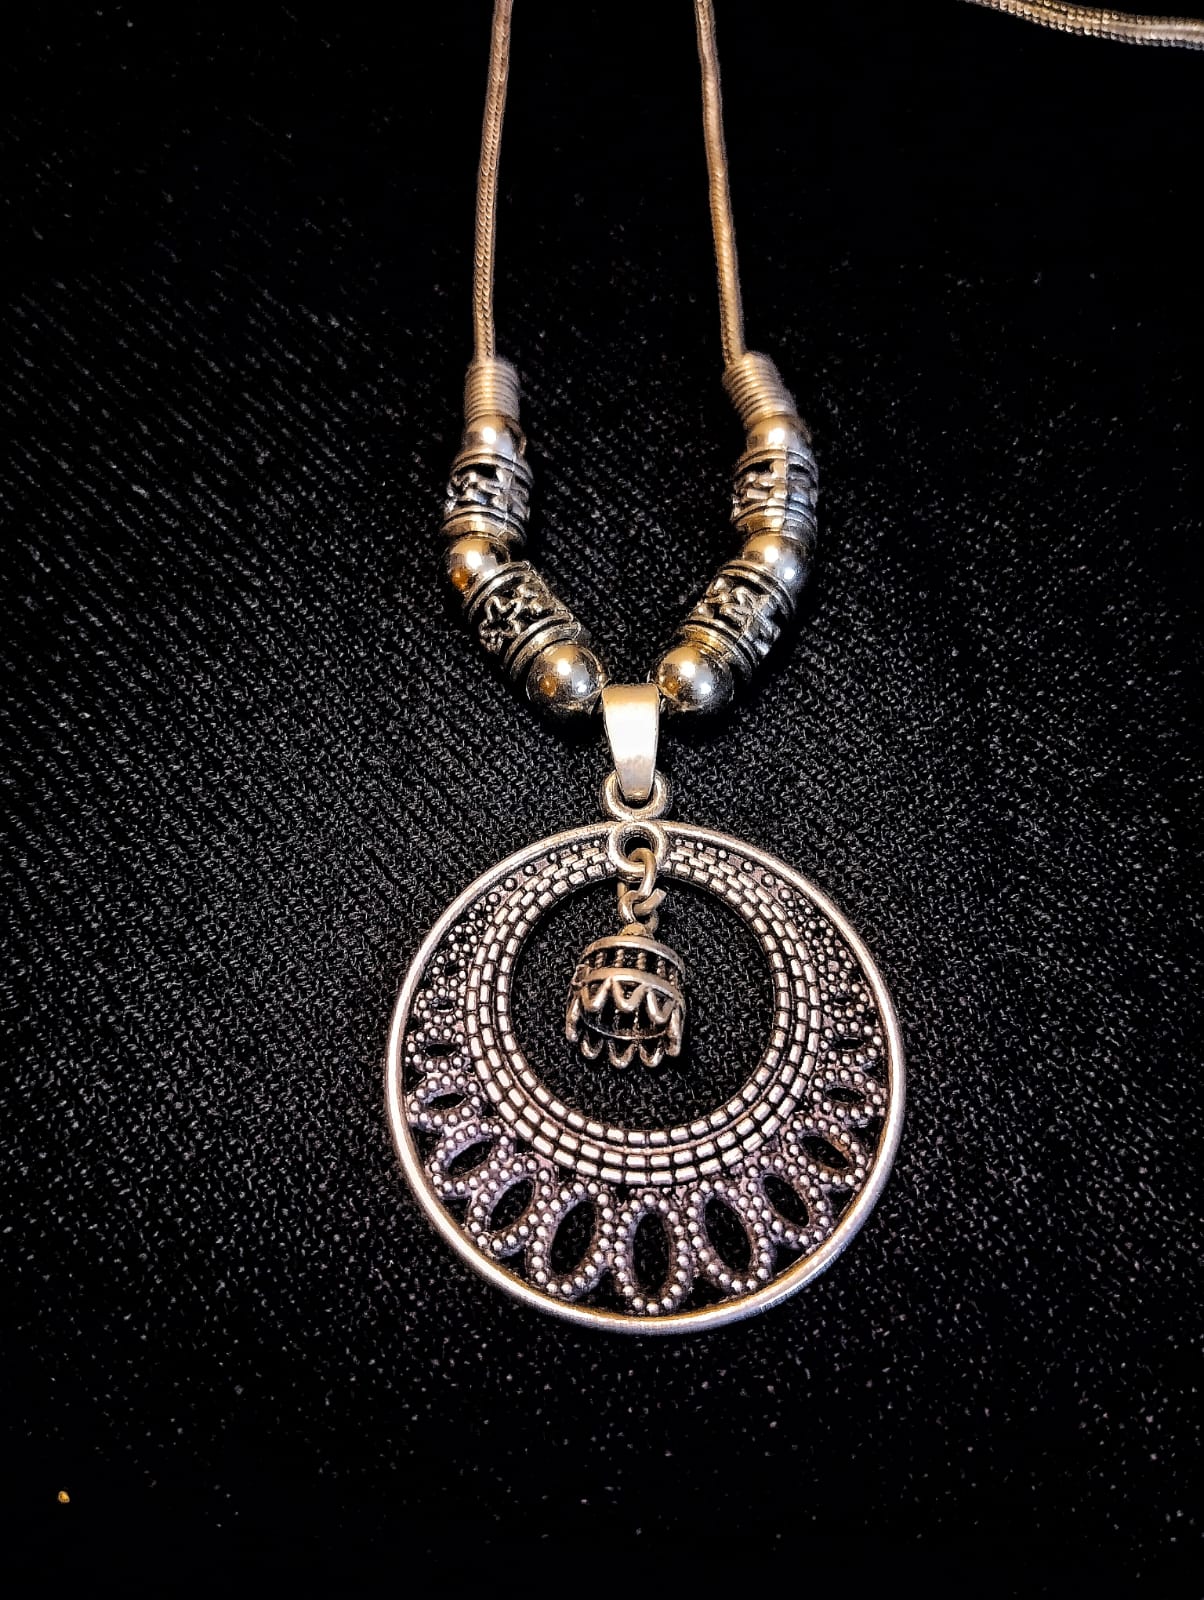 Close-up View of Oxidized Silver Crescent Circle Pendant with Hanging Bell Charm